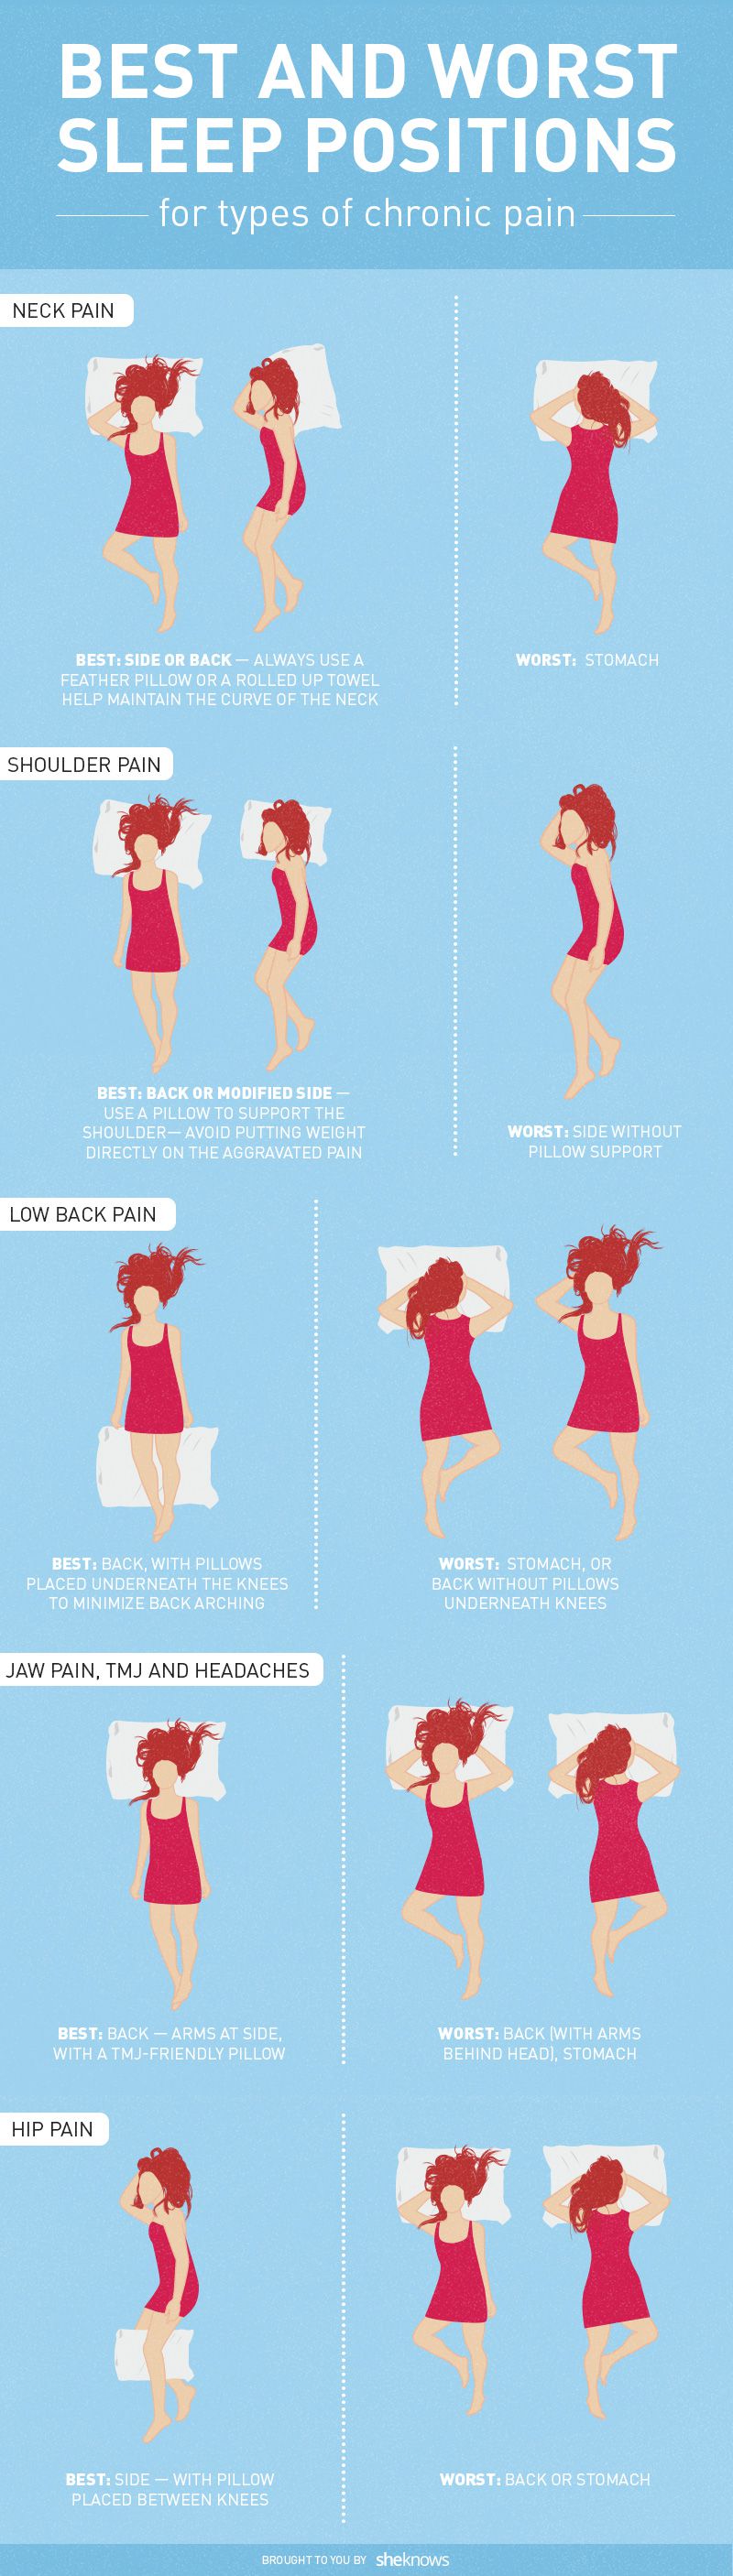 Best and Worst Sleeping Positions